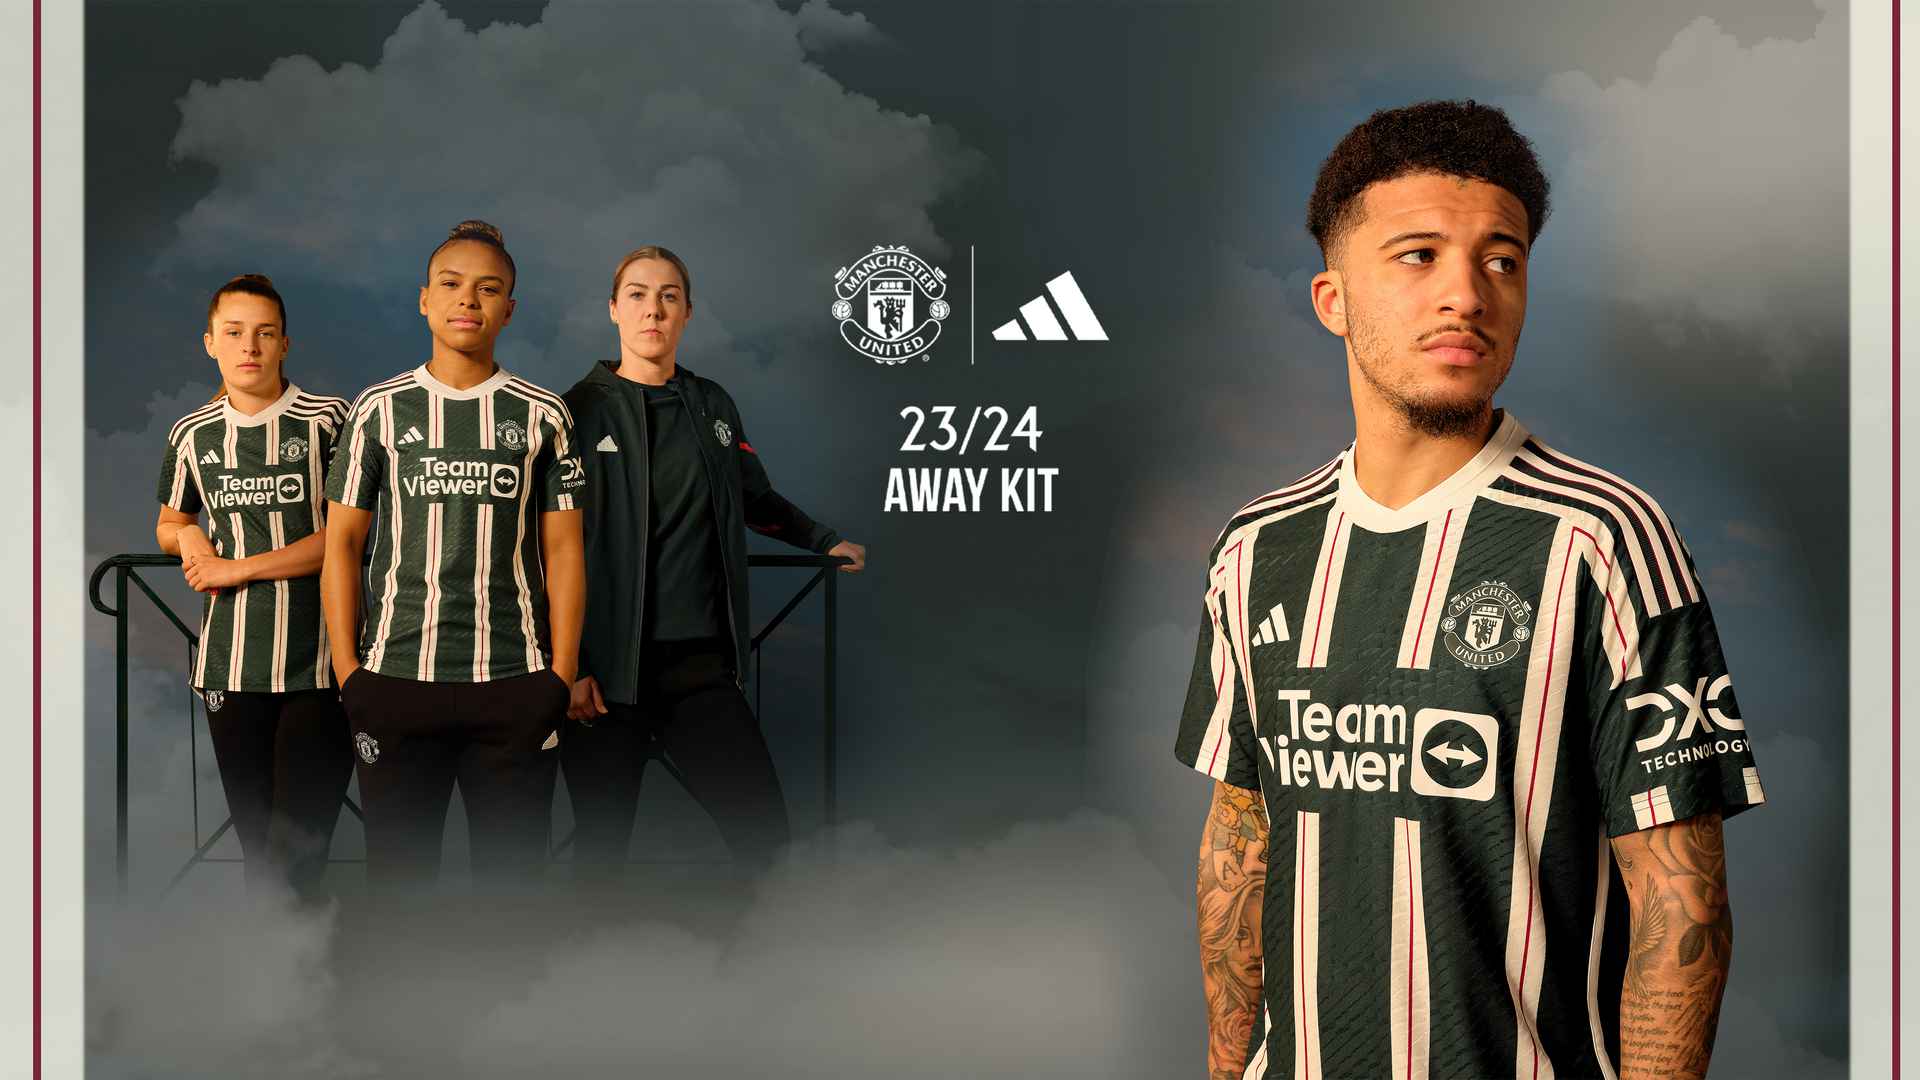 Man Utd 2023-24 kit: New home, away and third jerseys, release